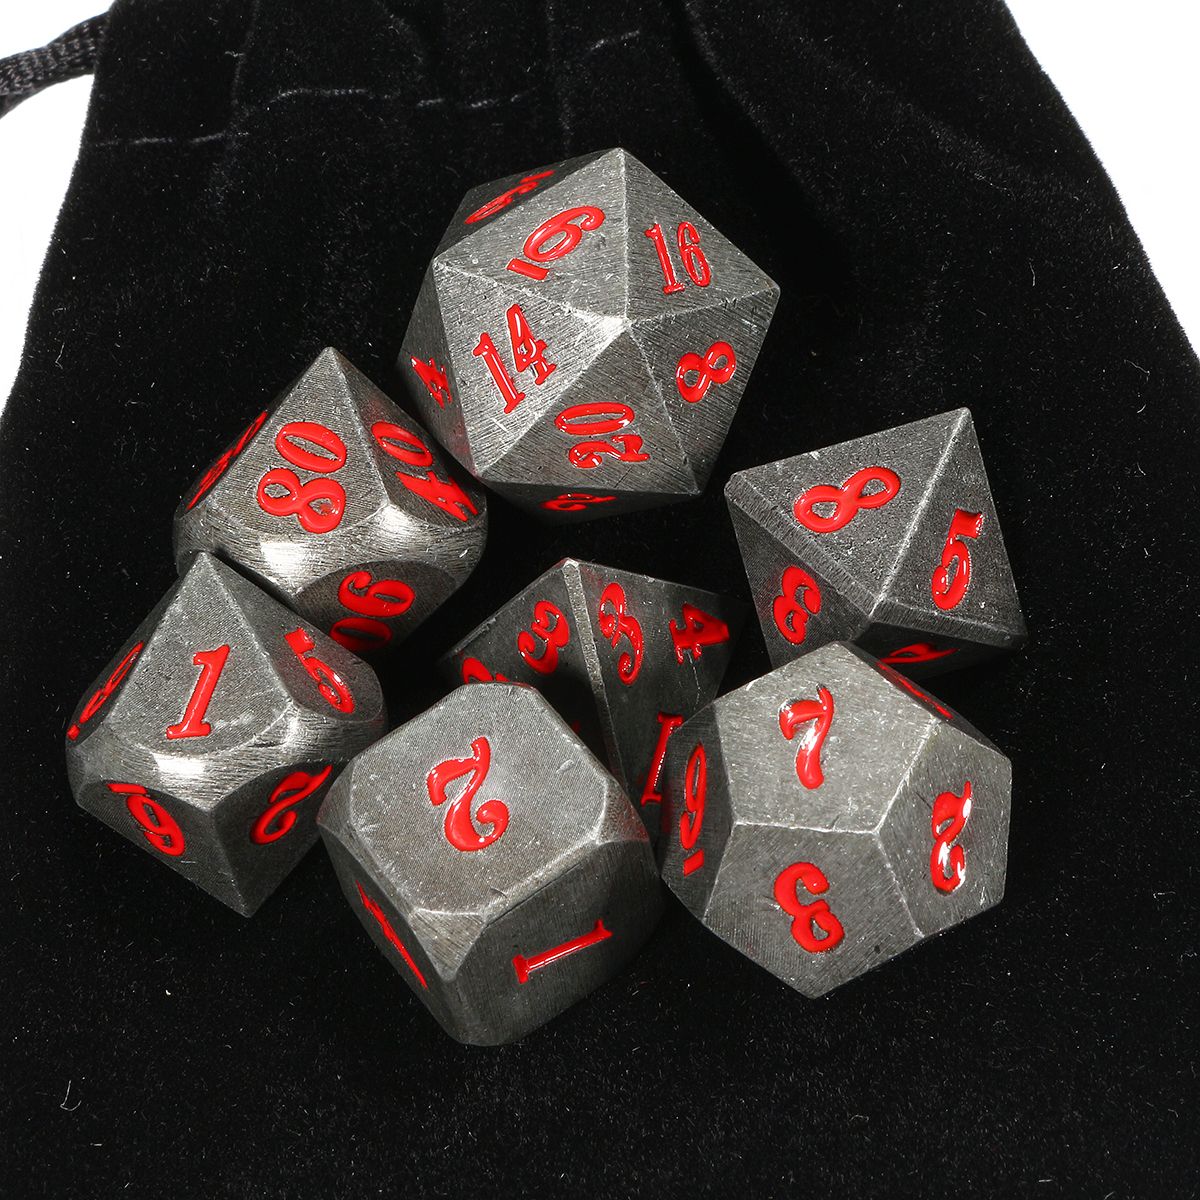 Antique-Metal-7-Pcs-Multisided-Dice-Heavy-Metal-Polyhedral-Dices-Set-w-Bag-1292360